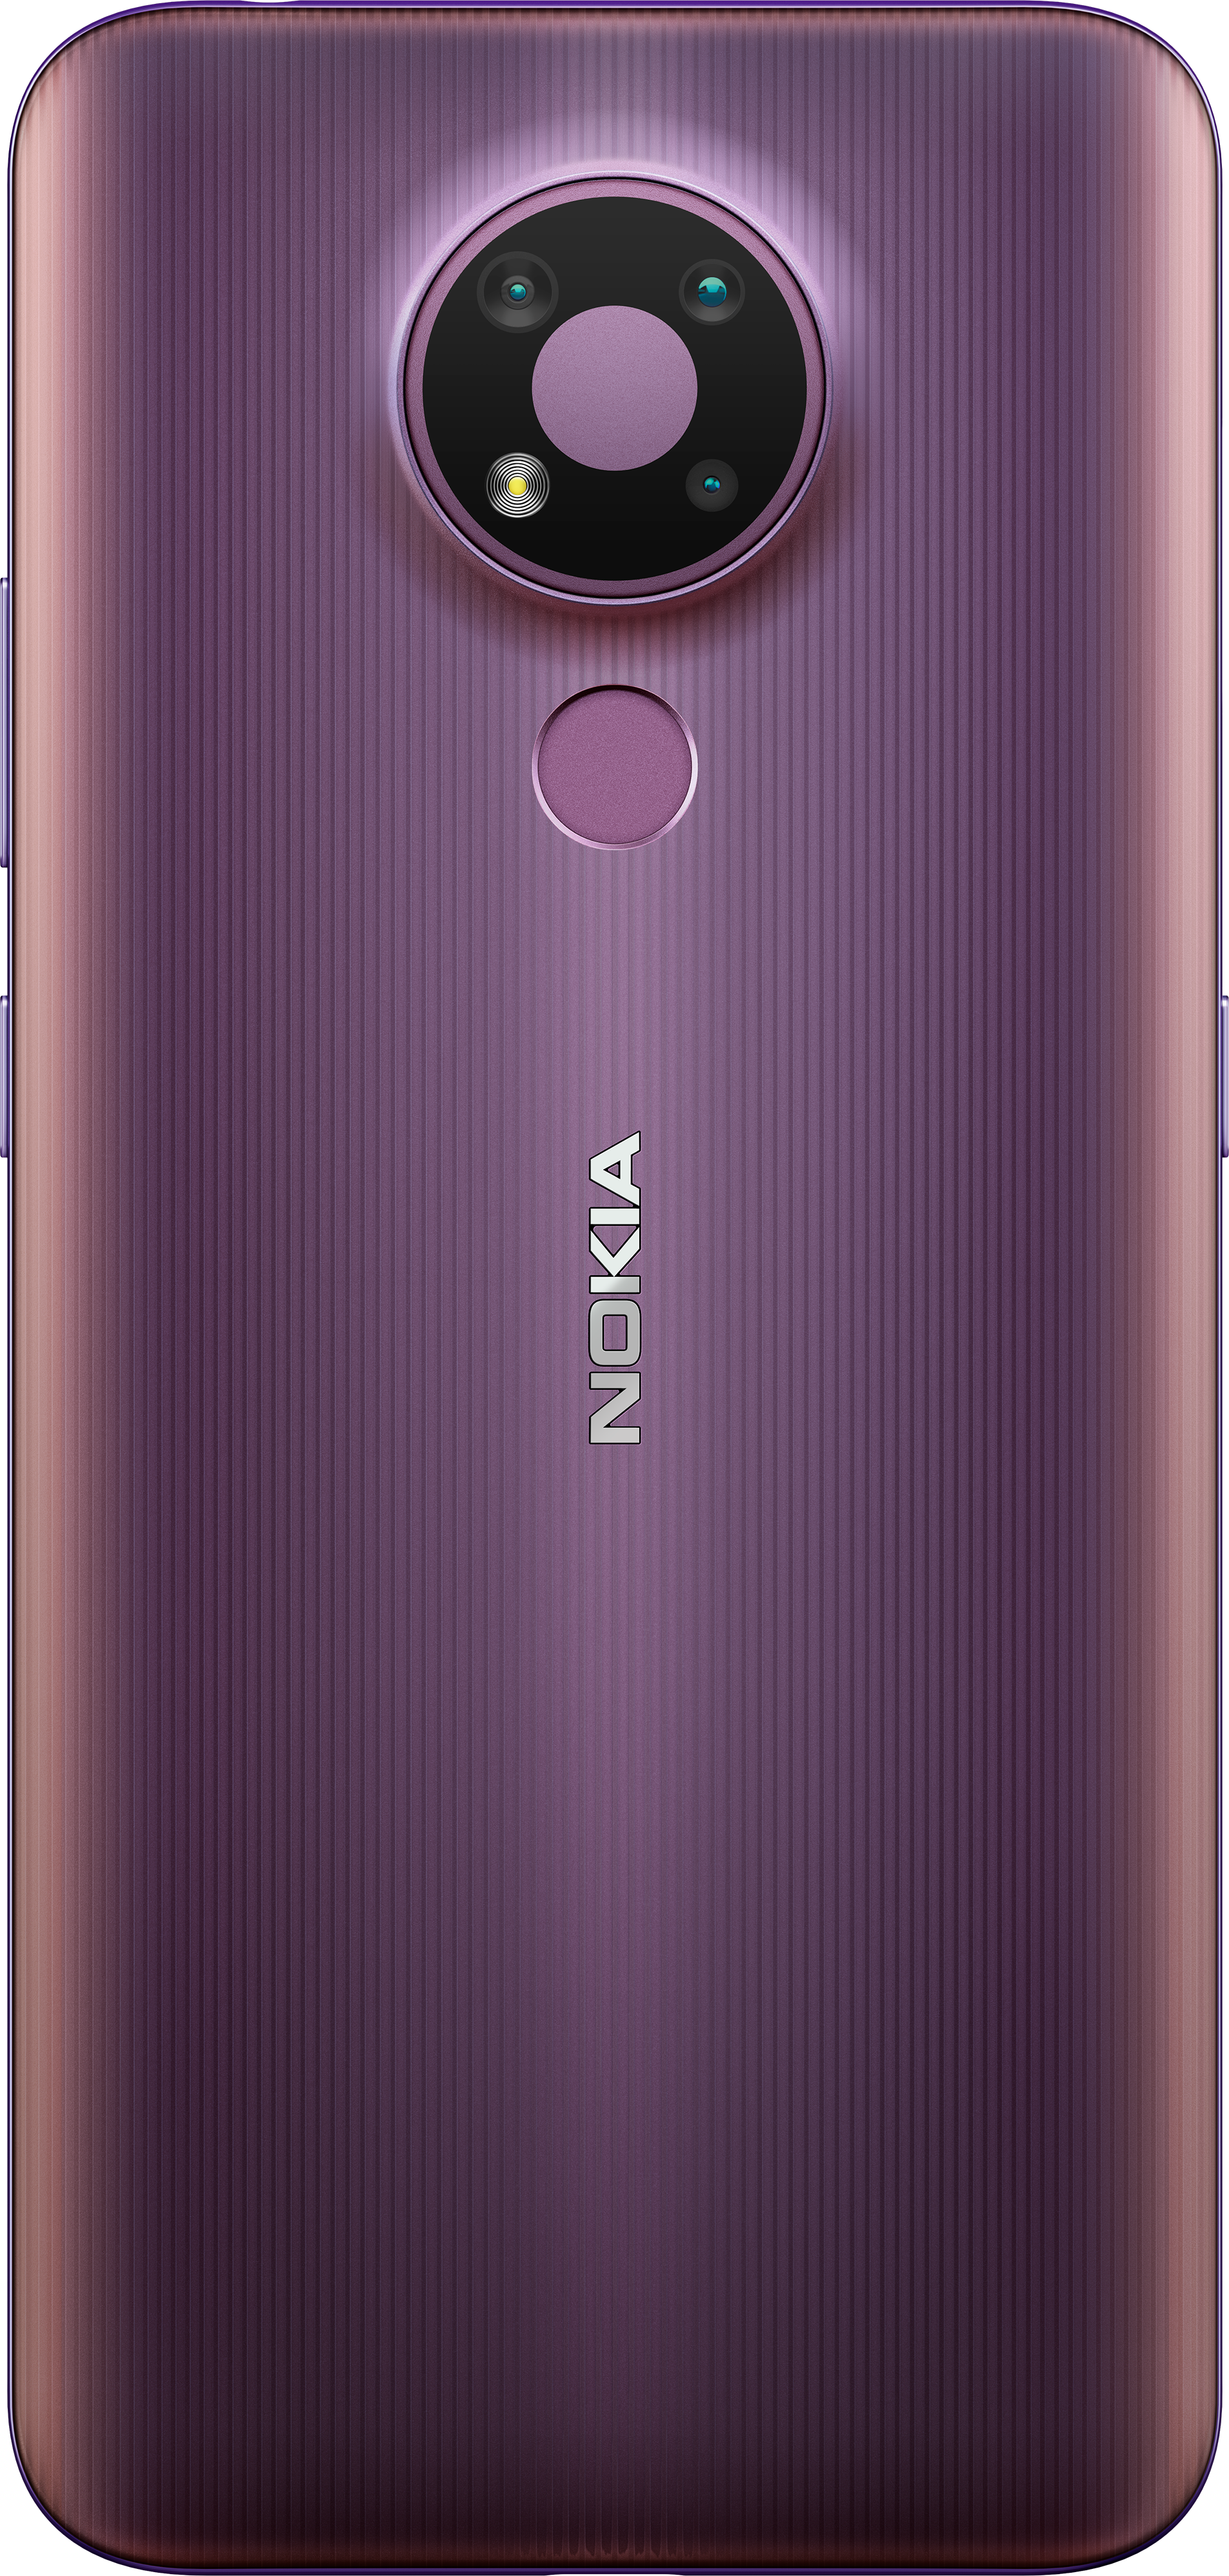 Nokia Smartphones Mit Android Android 10